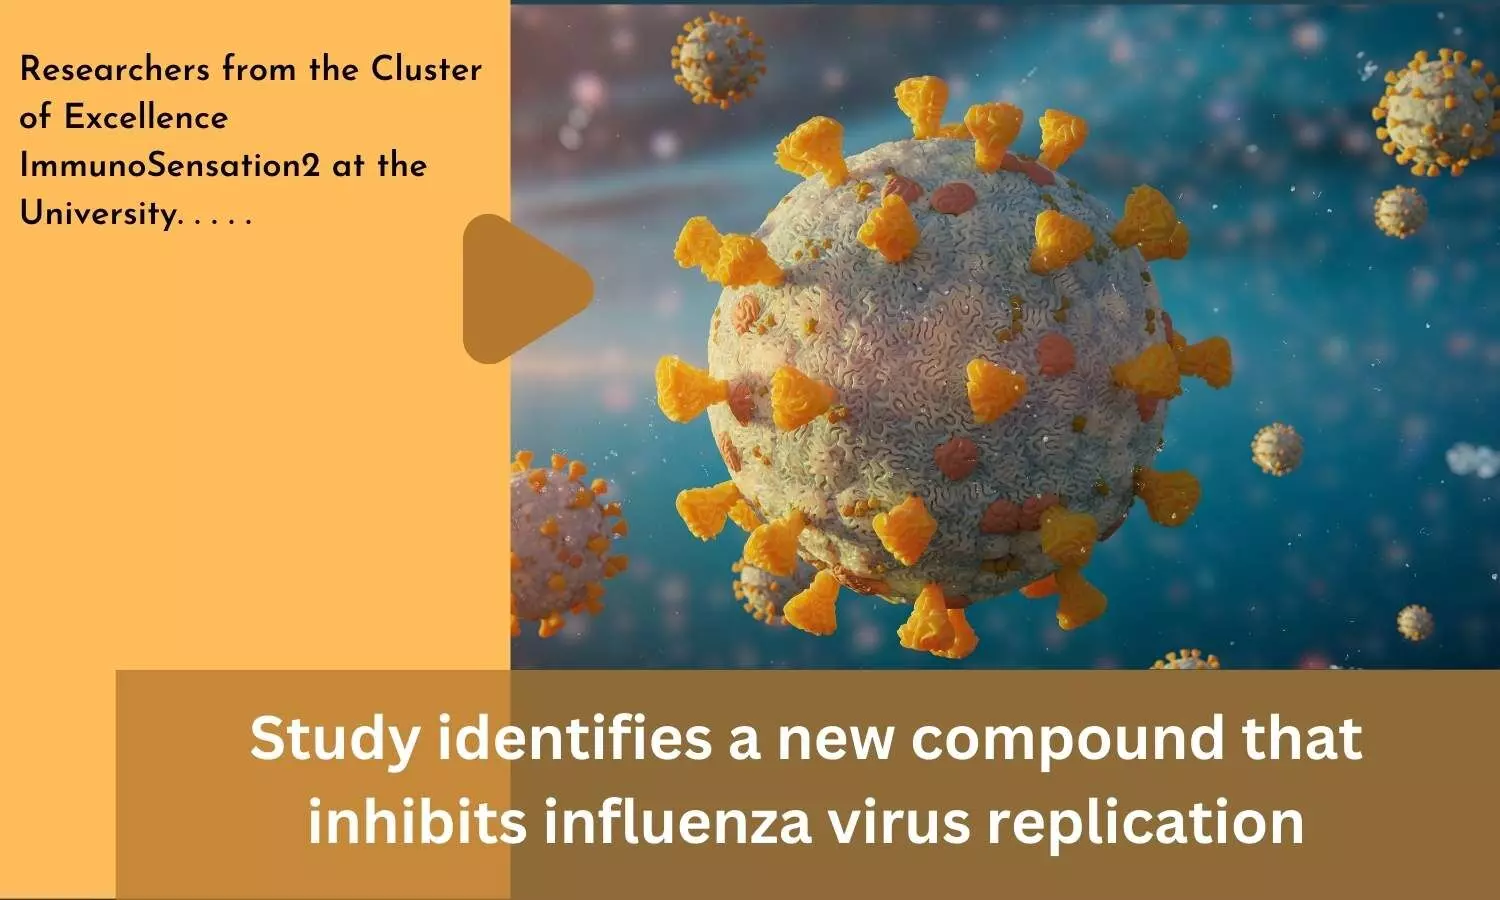 Study identifies a new compound that inhibits influenza virus replication